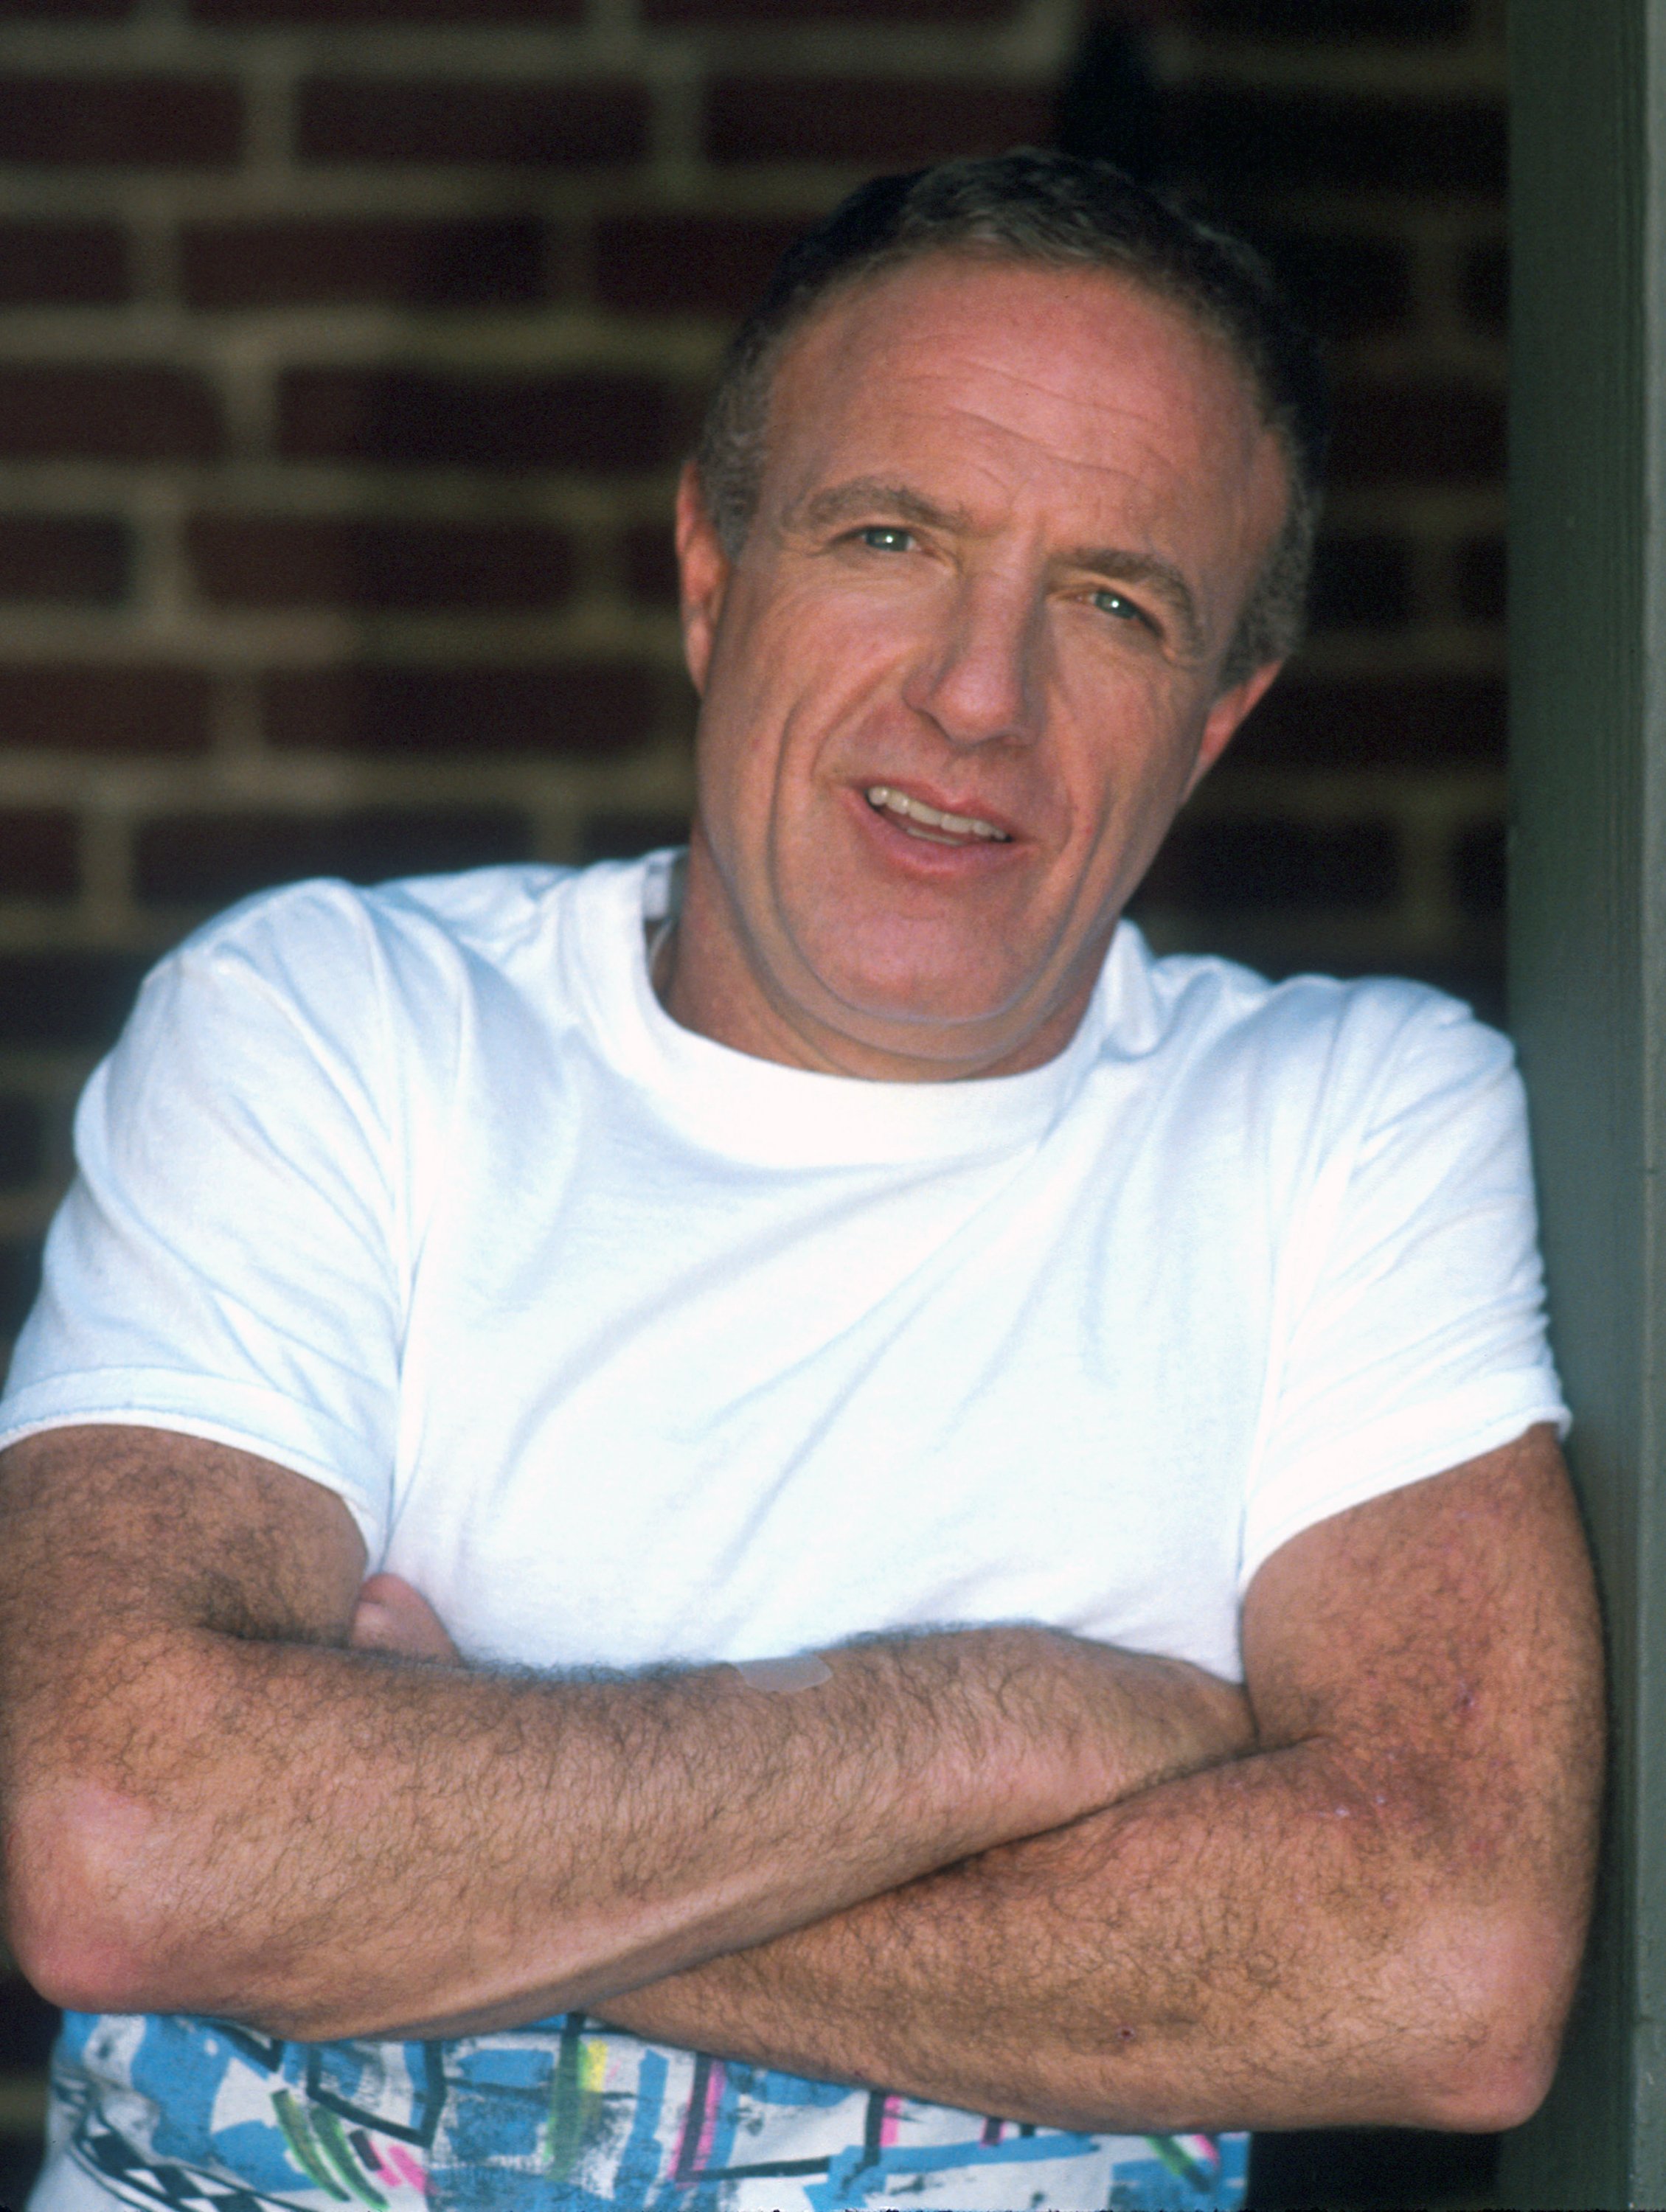 James Caan at his home on September 29, 1988, in Los Angeles, California. | Source: Getty Images